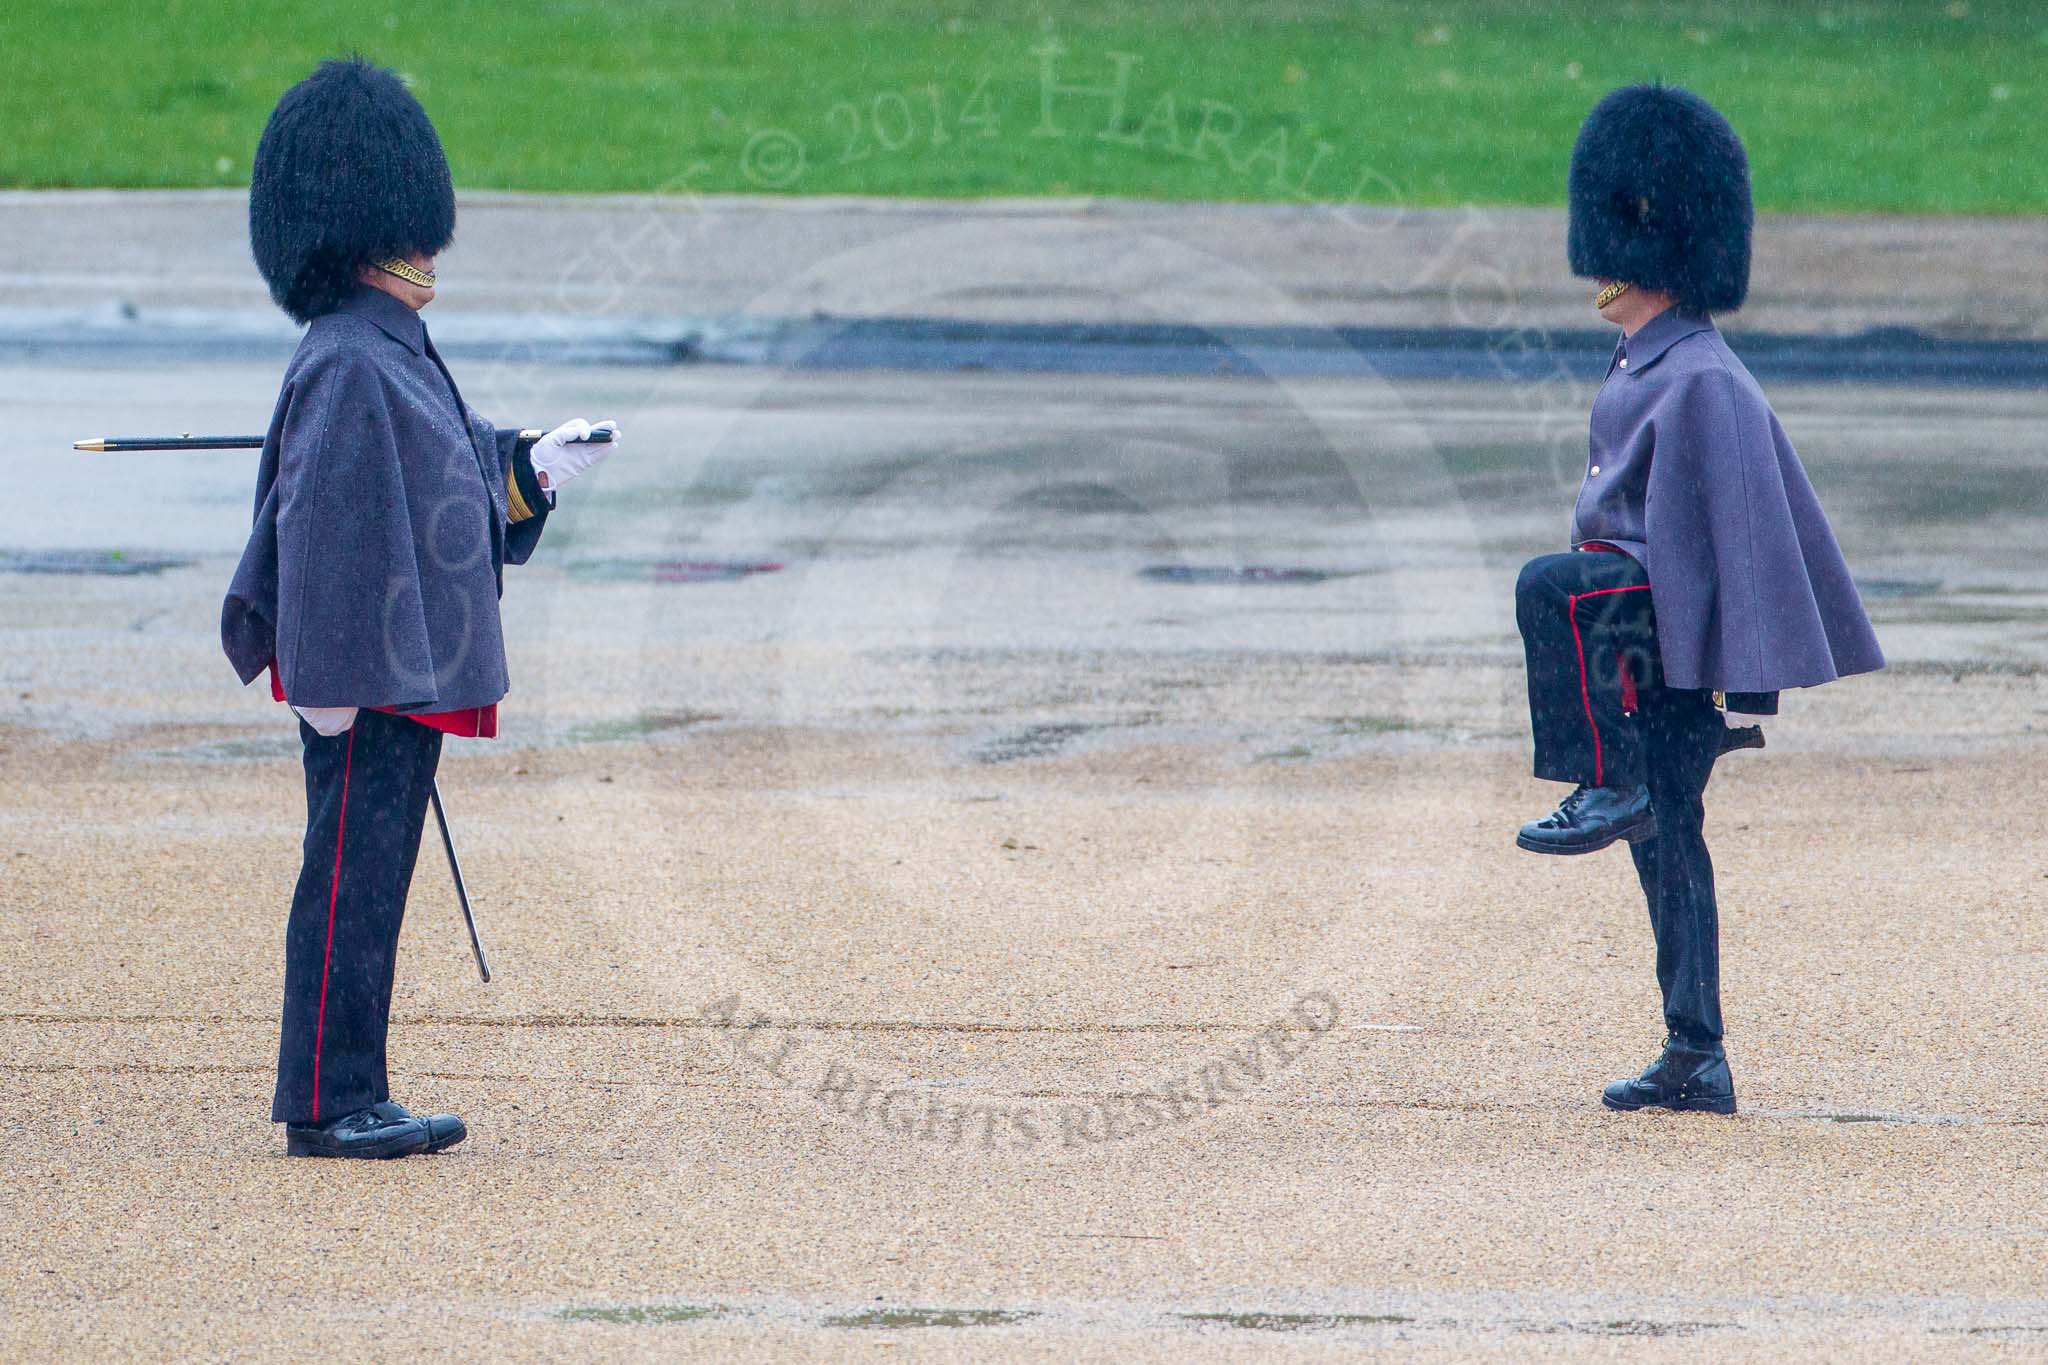 The Colonel's Review 2014.
Horse Guards Parade, Westminster,
London,

United Kingdom,
on 07 June 2014 at 10:09, image #63